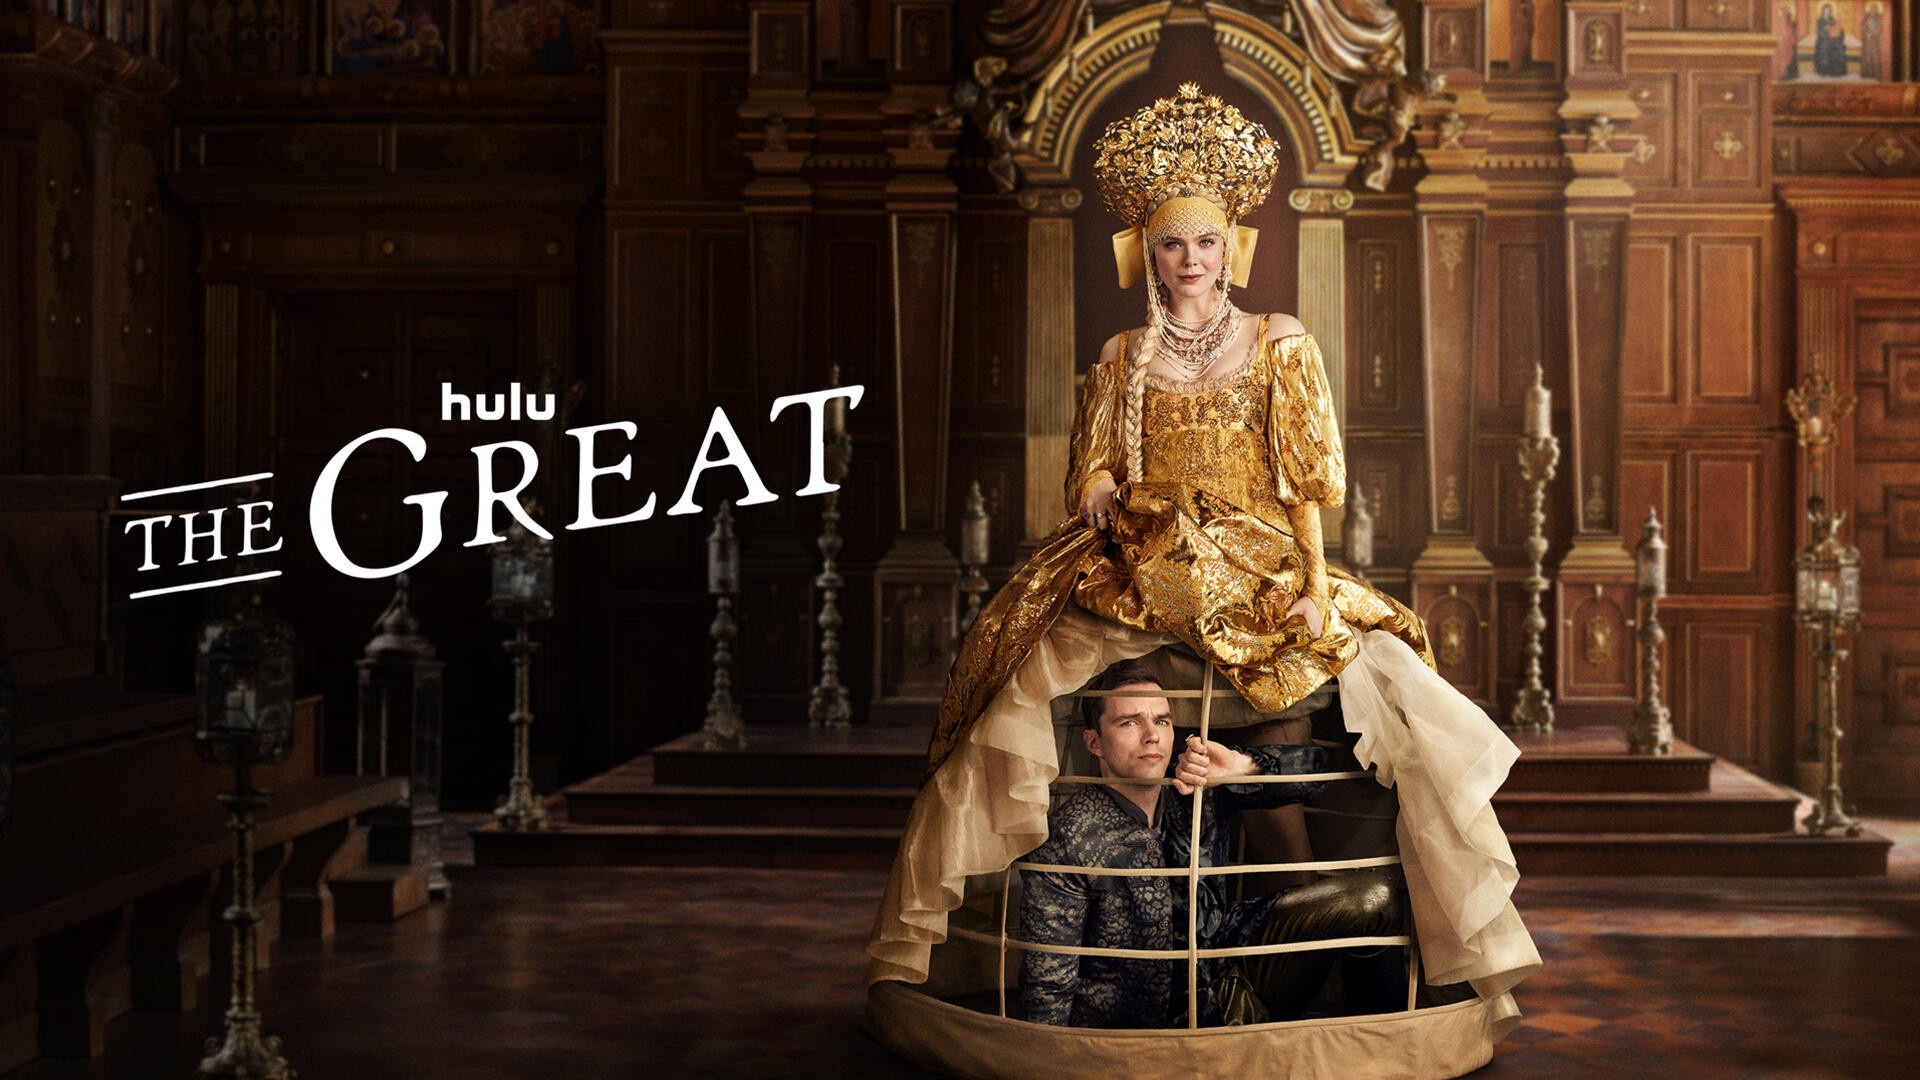 The Great (TV series): A fictionalized and anachronistic story of an idealistic young girl who honors an arranged marriage to the mercurial Russian Emperor Peter. 1920x1080 Full HD Background.